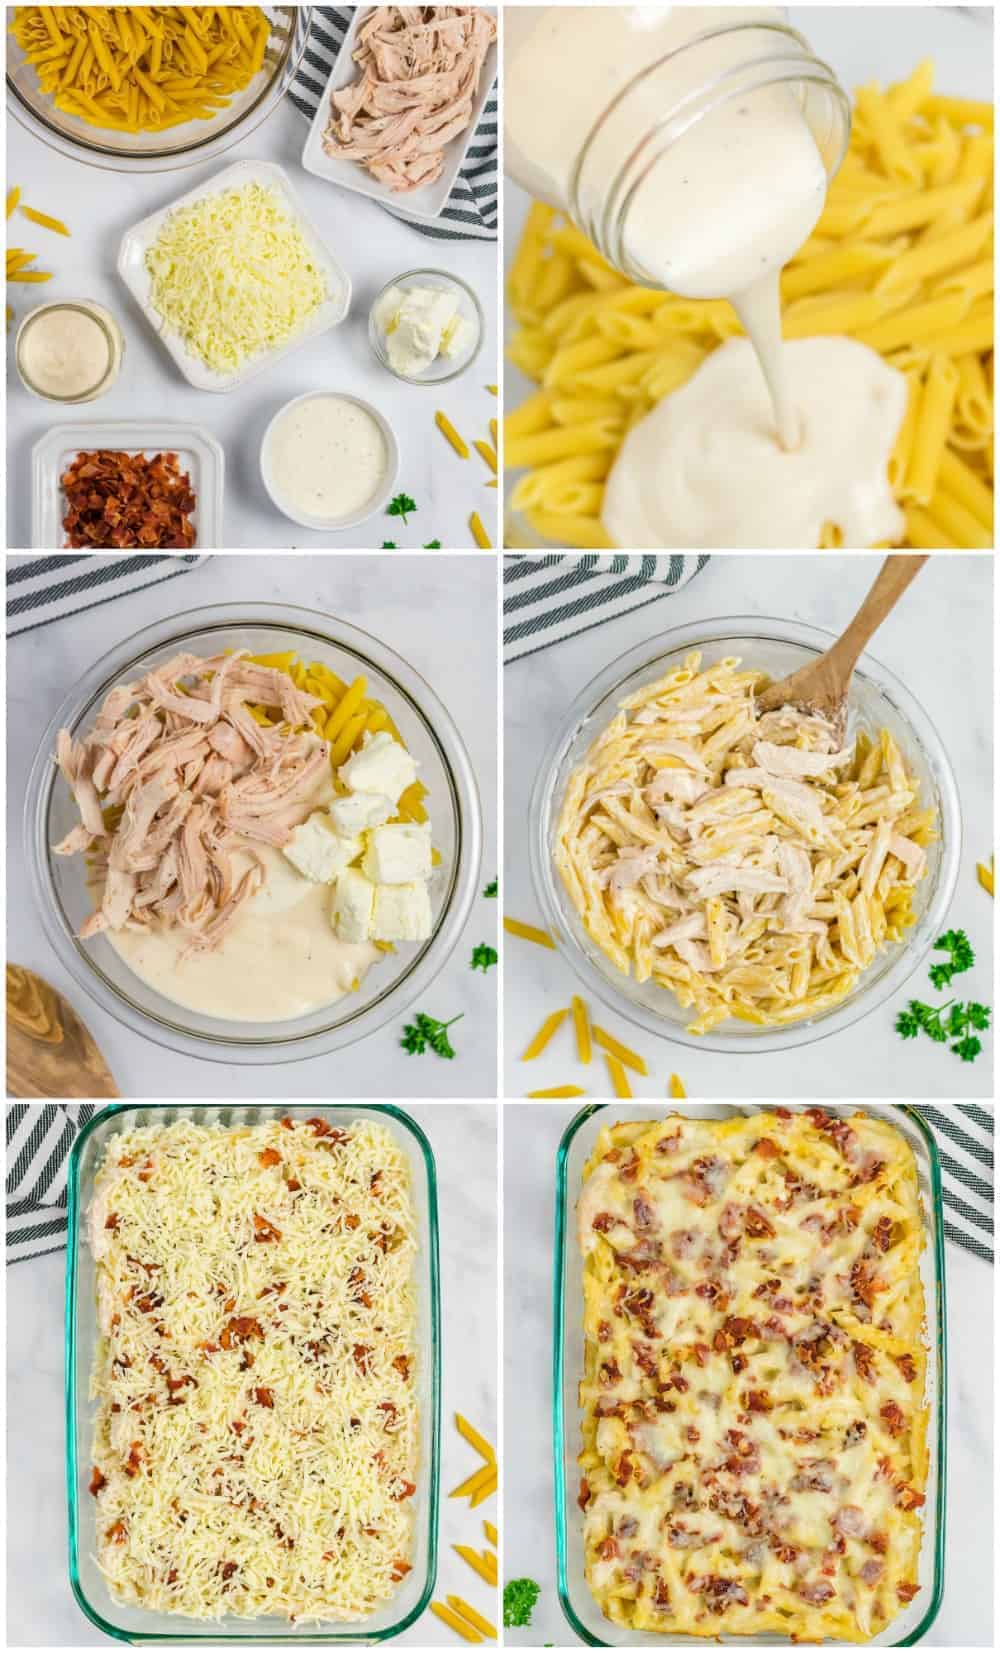 Step by step photos to show how to make the dish